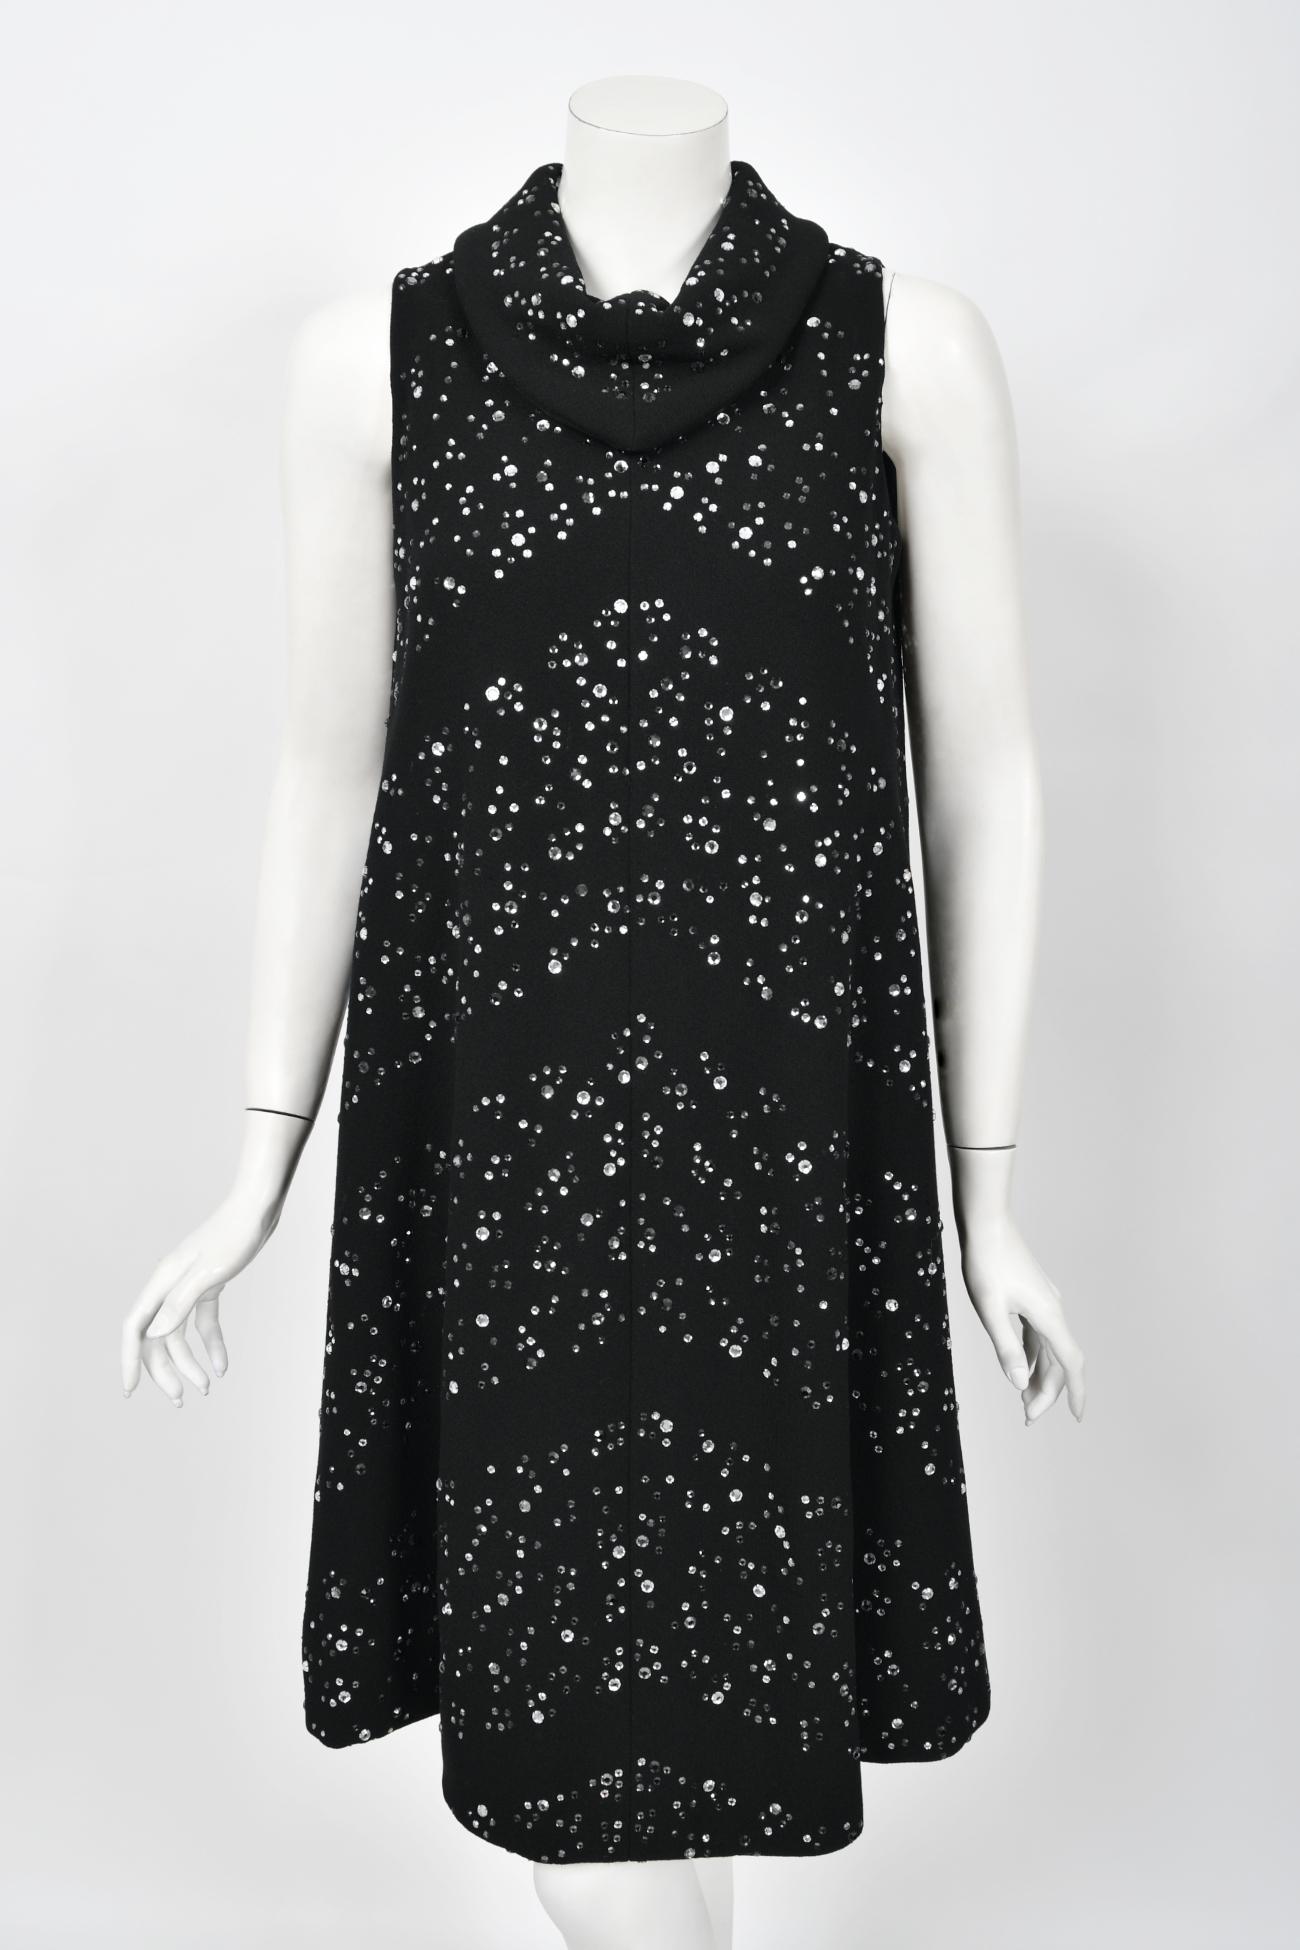 Vintage 1960's Pauline Trigère Rhinestone Studded Black Wool Mod Trapeze Dress  In Good Condition For Sale In Beverly Hills, CA